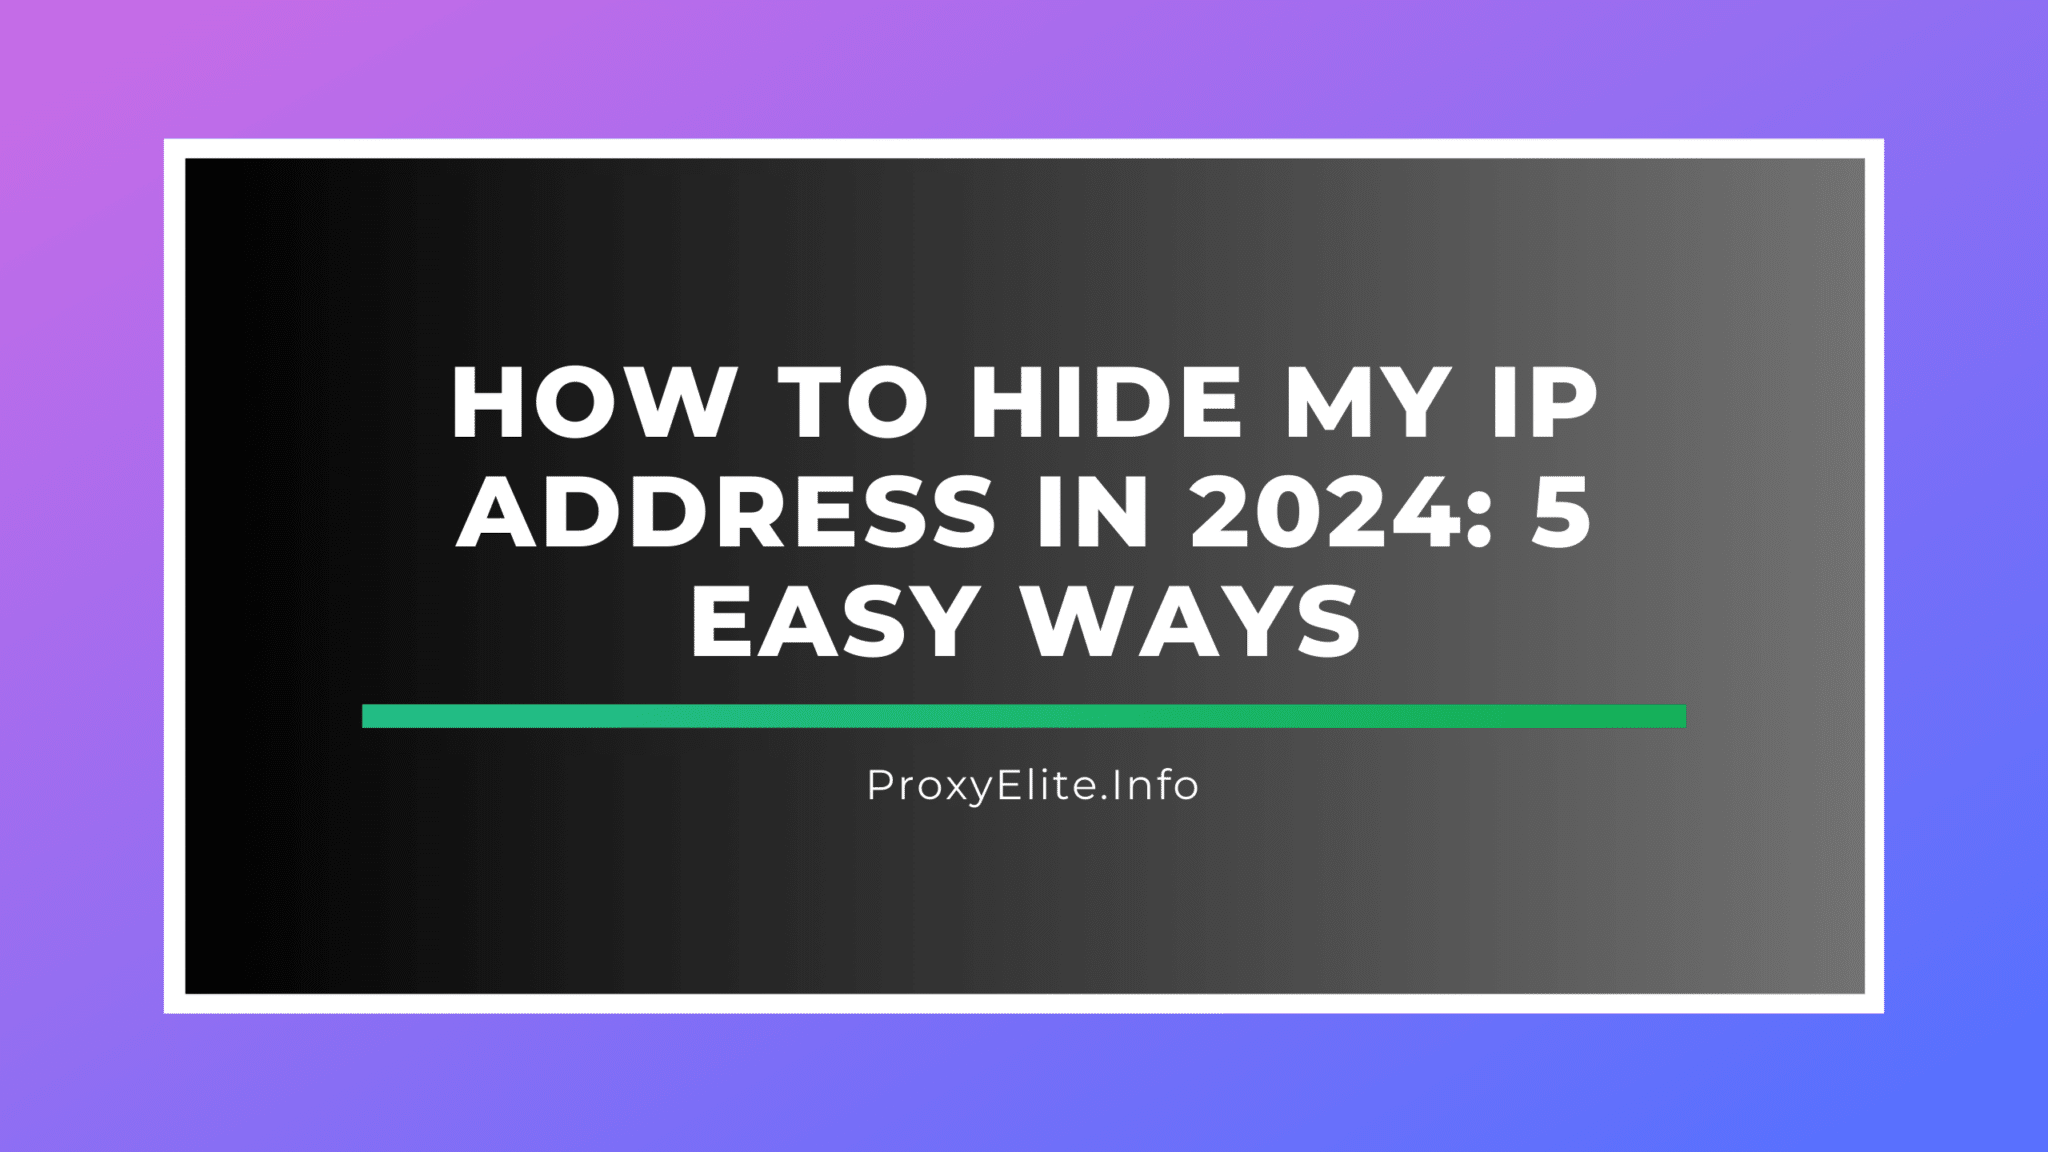 How to Hide My IP Address in 2024: 5 Easy Ways